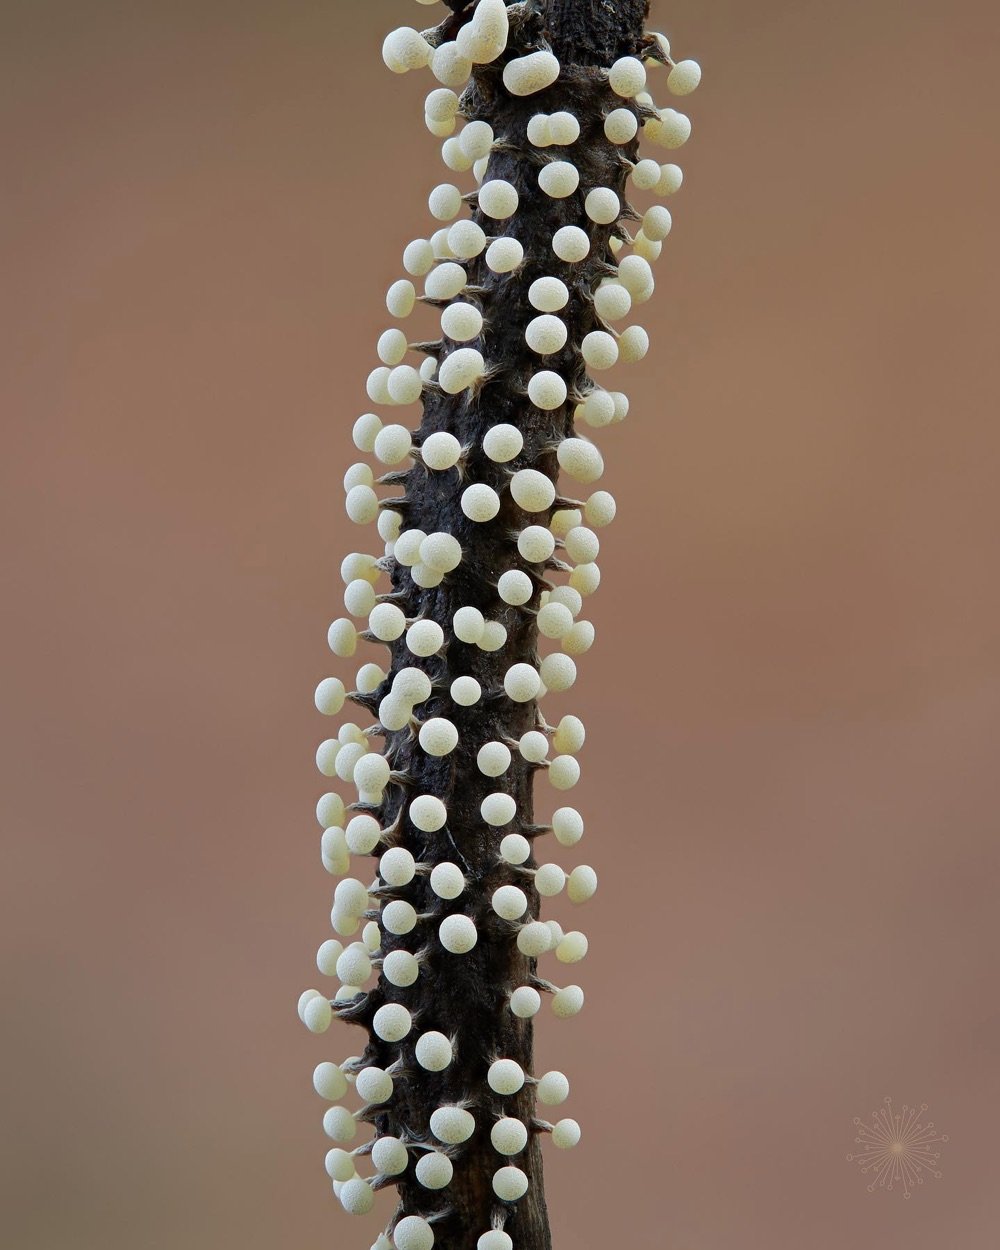 a slime mold with white globules on a black stalk